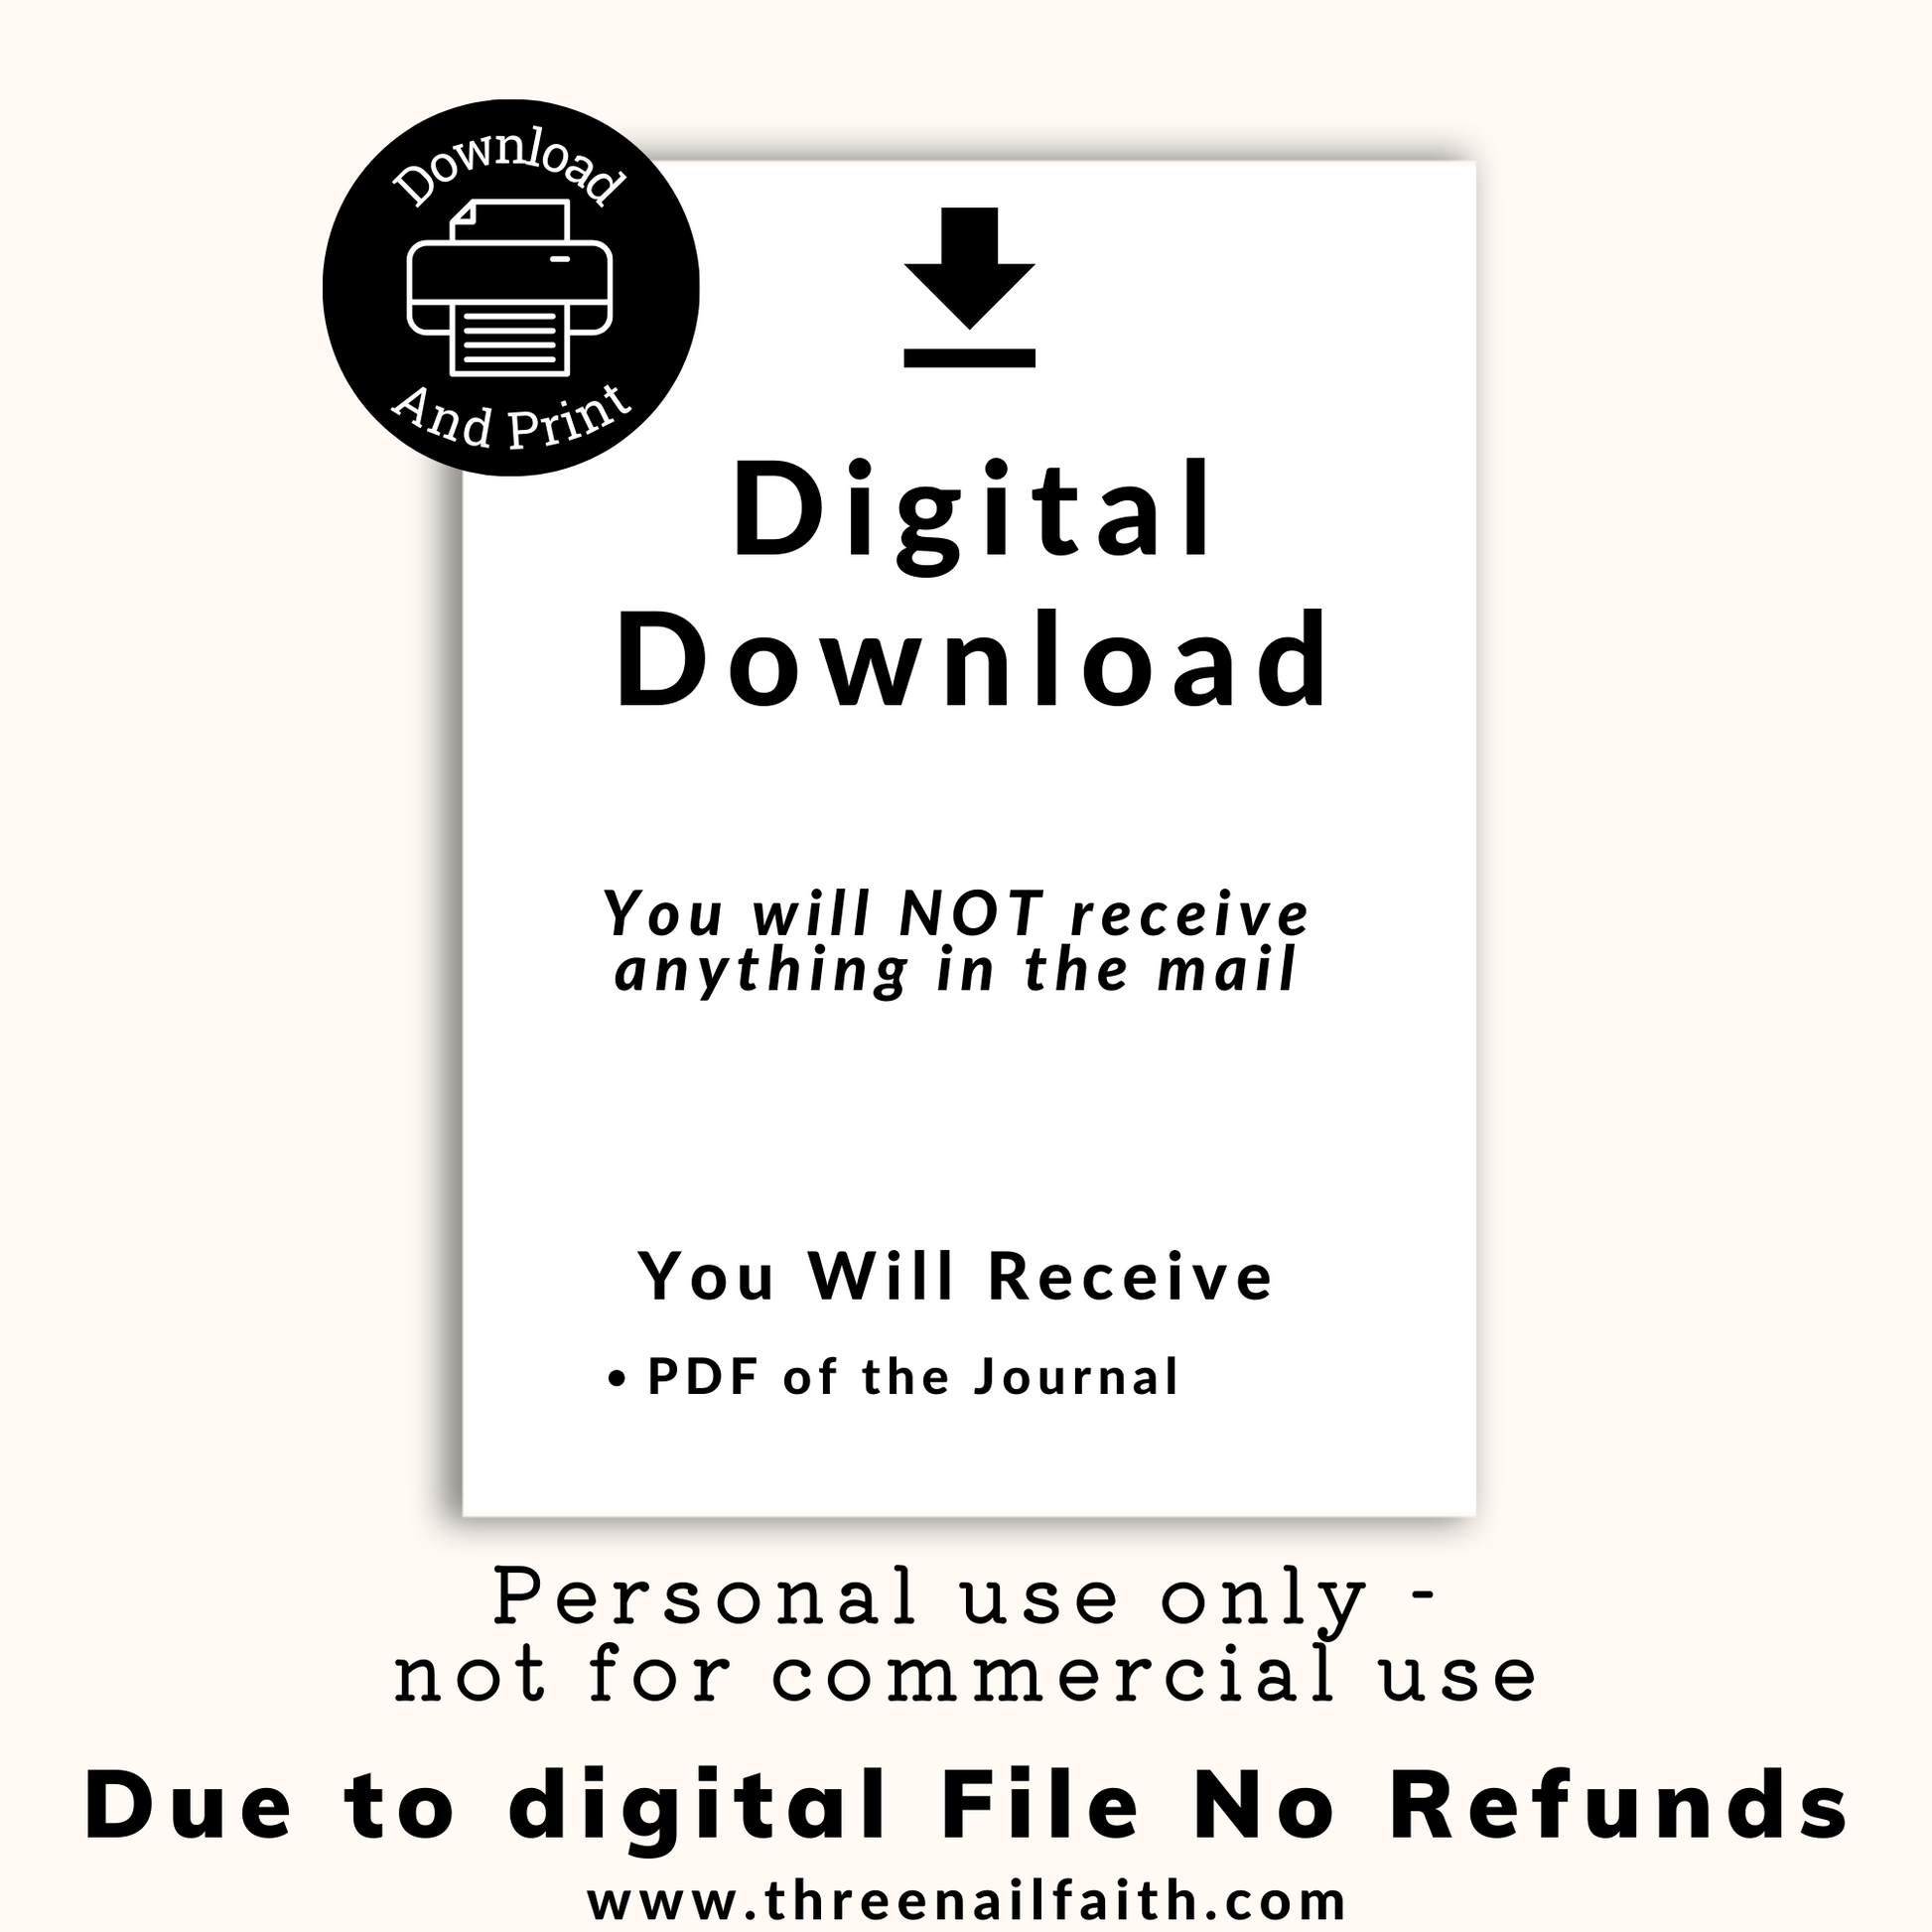 This is a digital download nothing will be shipped to youl. This is for personal use only. no refunds due to the digital nature. 